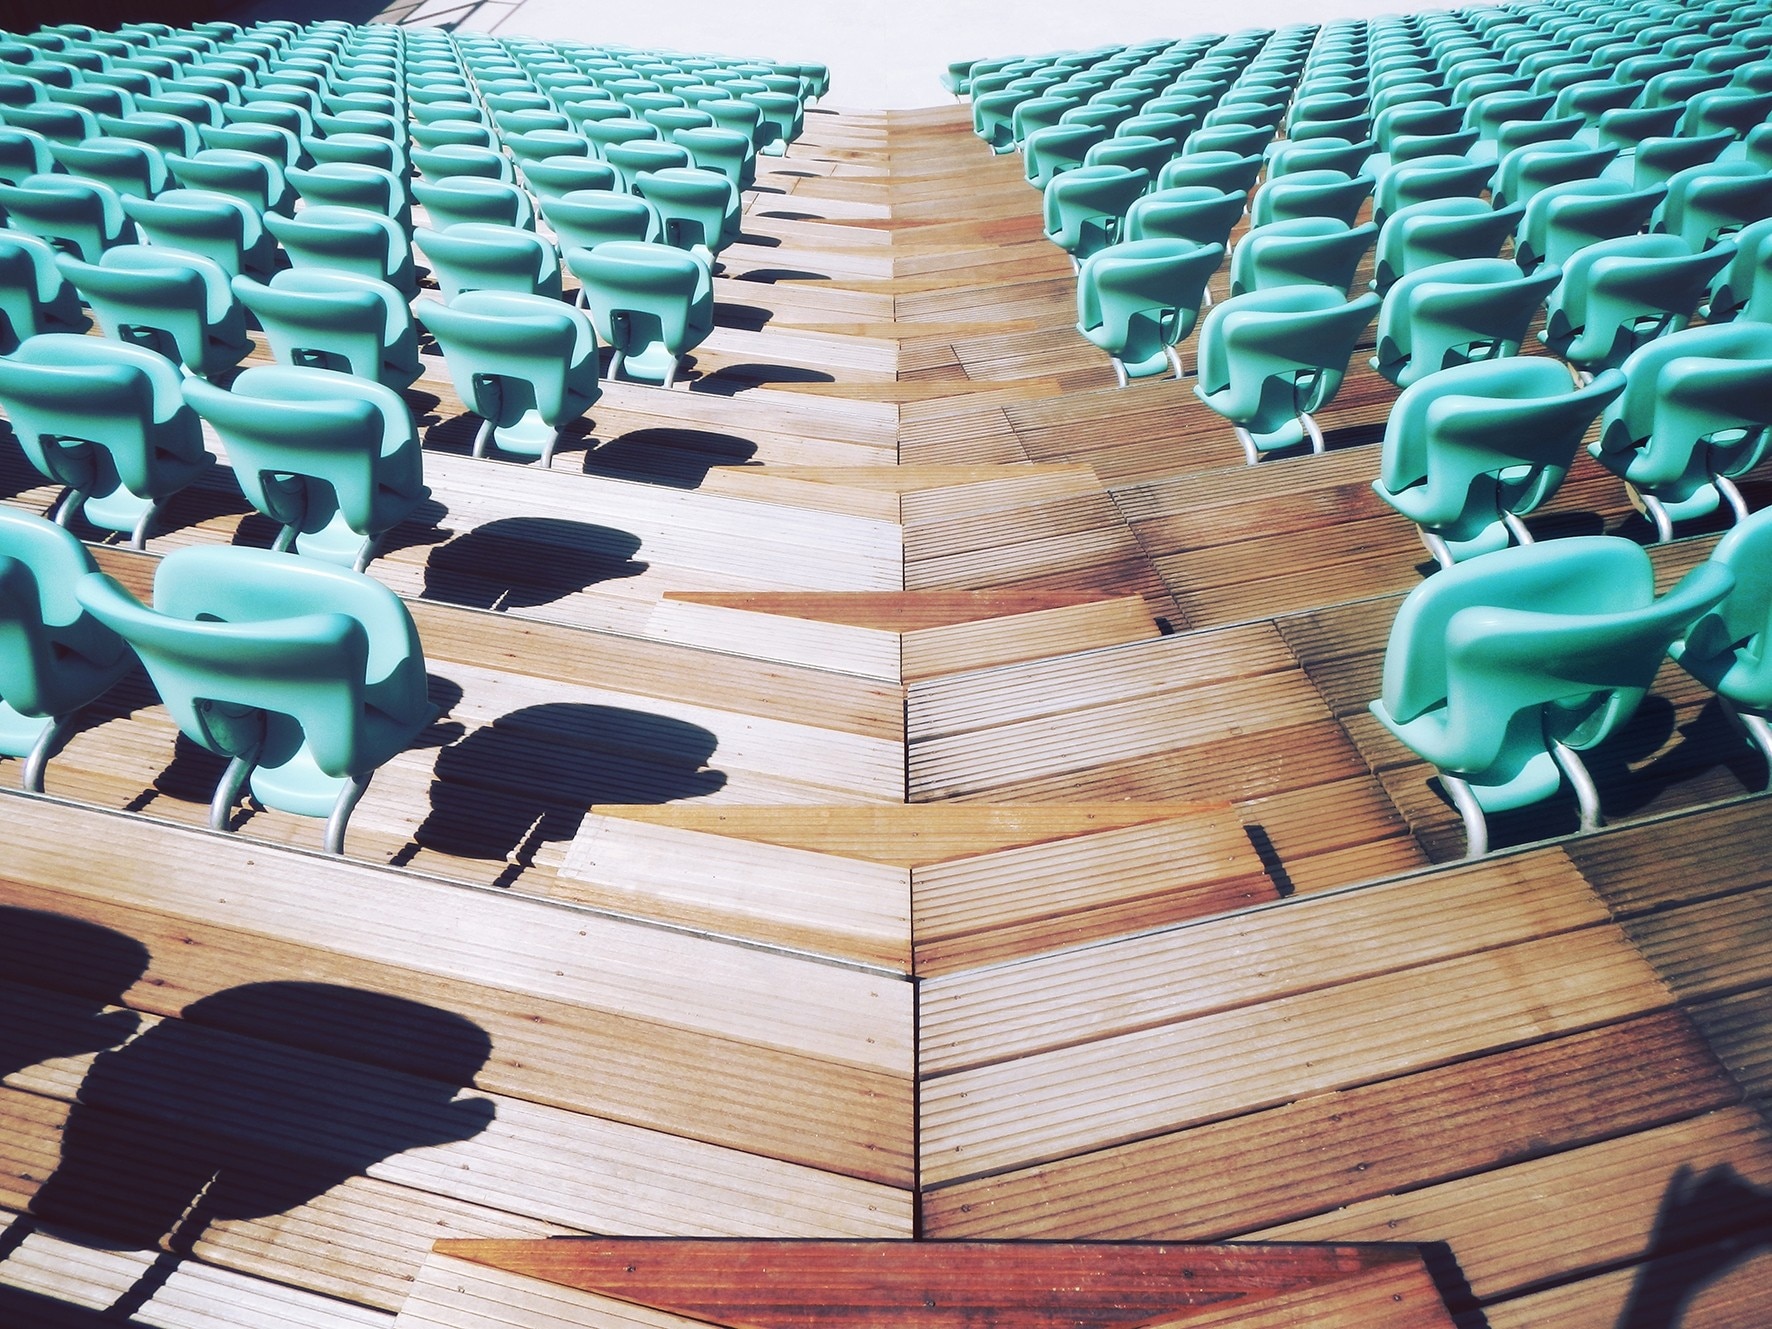 photo of aligned green chairs on brown hardwood floor